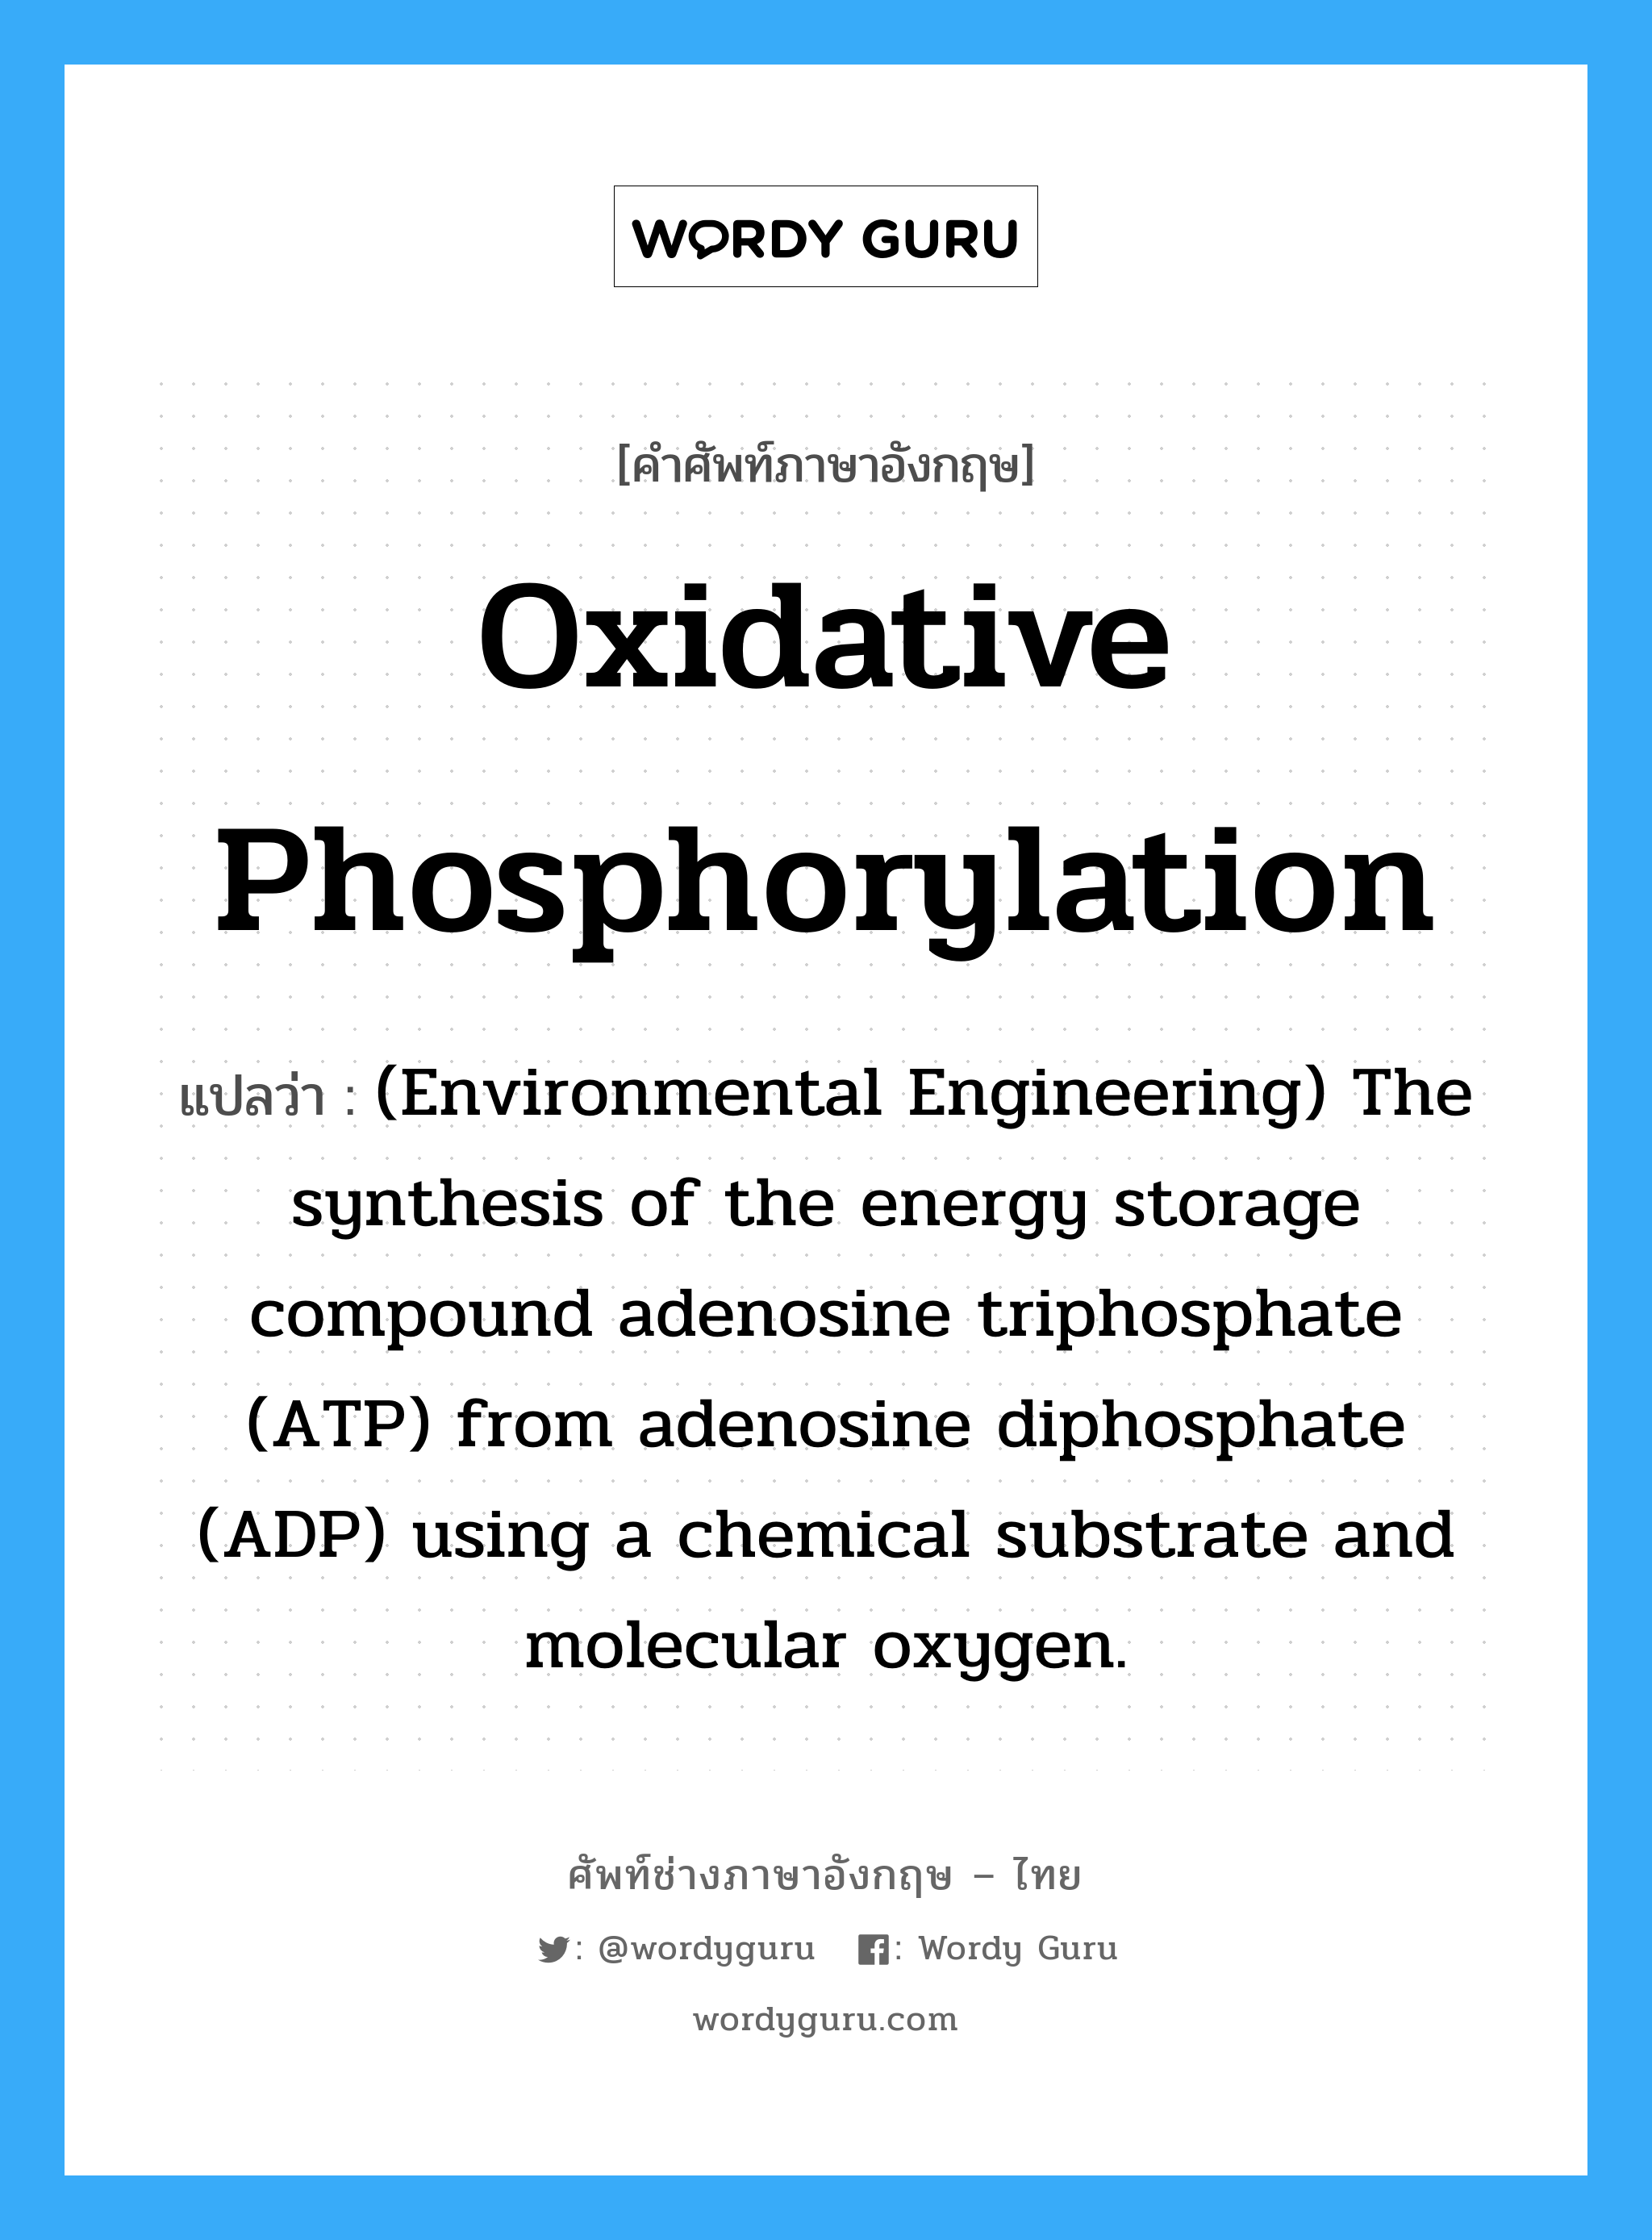 (Environmental Engineering) The synthesis of the energy storage compound adenosine triphosphate (ATP) from adenosine diphosphate (ADP) using a chemical substrate and molecular oxygen. ภาษาอังกฤษ?, คำศัพท์ช่างภาษาอังกฤษ - ไทย (Environmental Engineering) The synthesis of the energy storage compound adenosine triphosphate (ATP) from adenosine diphosphate (ADP) using a chemical substrate and molecular oxygen. คำศัพท์ภาษาอังกฤษ (Environmental Engineering) The synthesis of the energy storage compound adenosine triphosphate (ATP) from adenosine diphosphate (ADP) using a chemical substrate and molecular oxygen. แปลว่า Oxidative phosphorylation